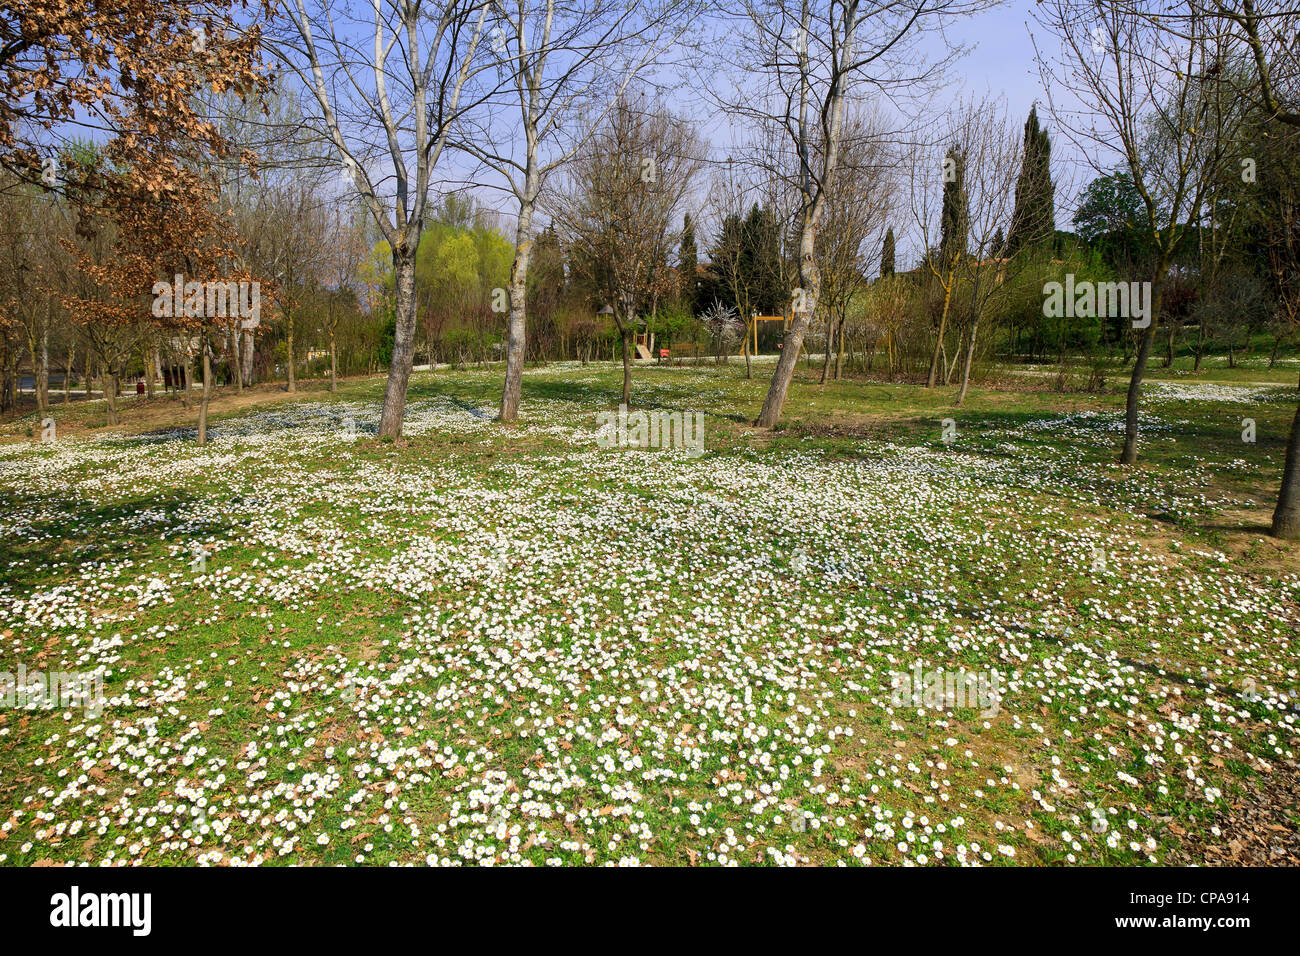 Meadow of daisies Stock Photo